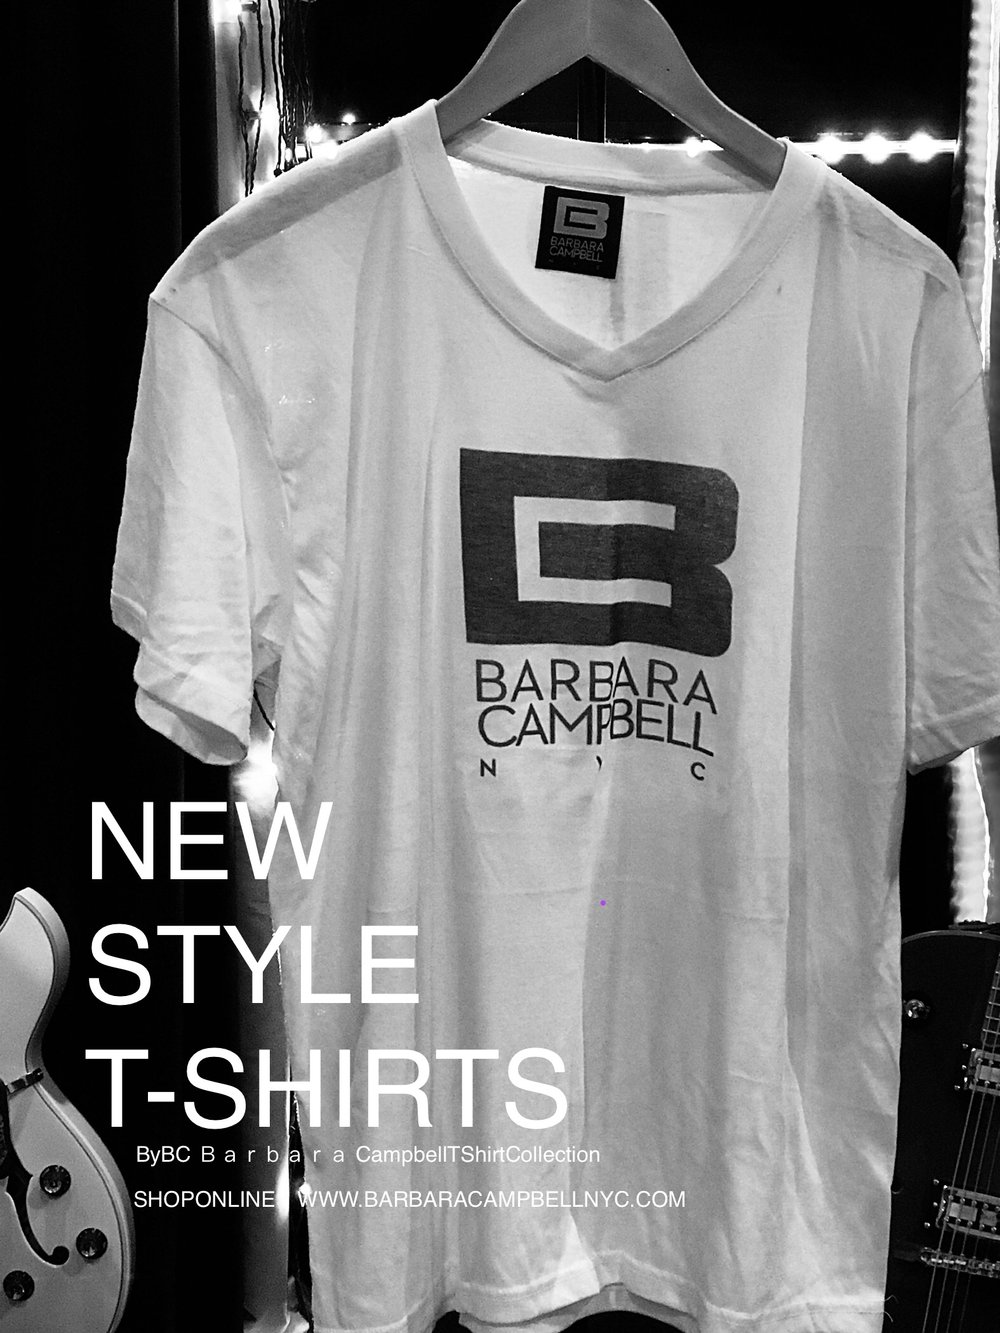 Bliv overrasket Udholdenhed Skulle BARBARA CAMPBELL NYC T-SHIRTS: BC™ Logo - Women's Cotton/Poly white - T- Shirt From Barbara Campbell NYC — Barbara Campbell NYC Made In Brooklyn  BrooklynLux Handmade Jewelry Accessories Handbags Fashion +Beauty & Home